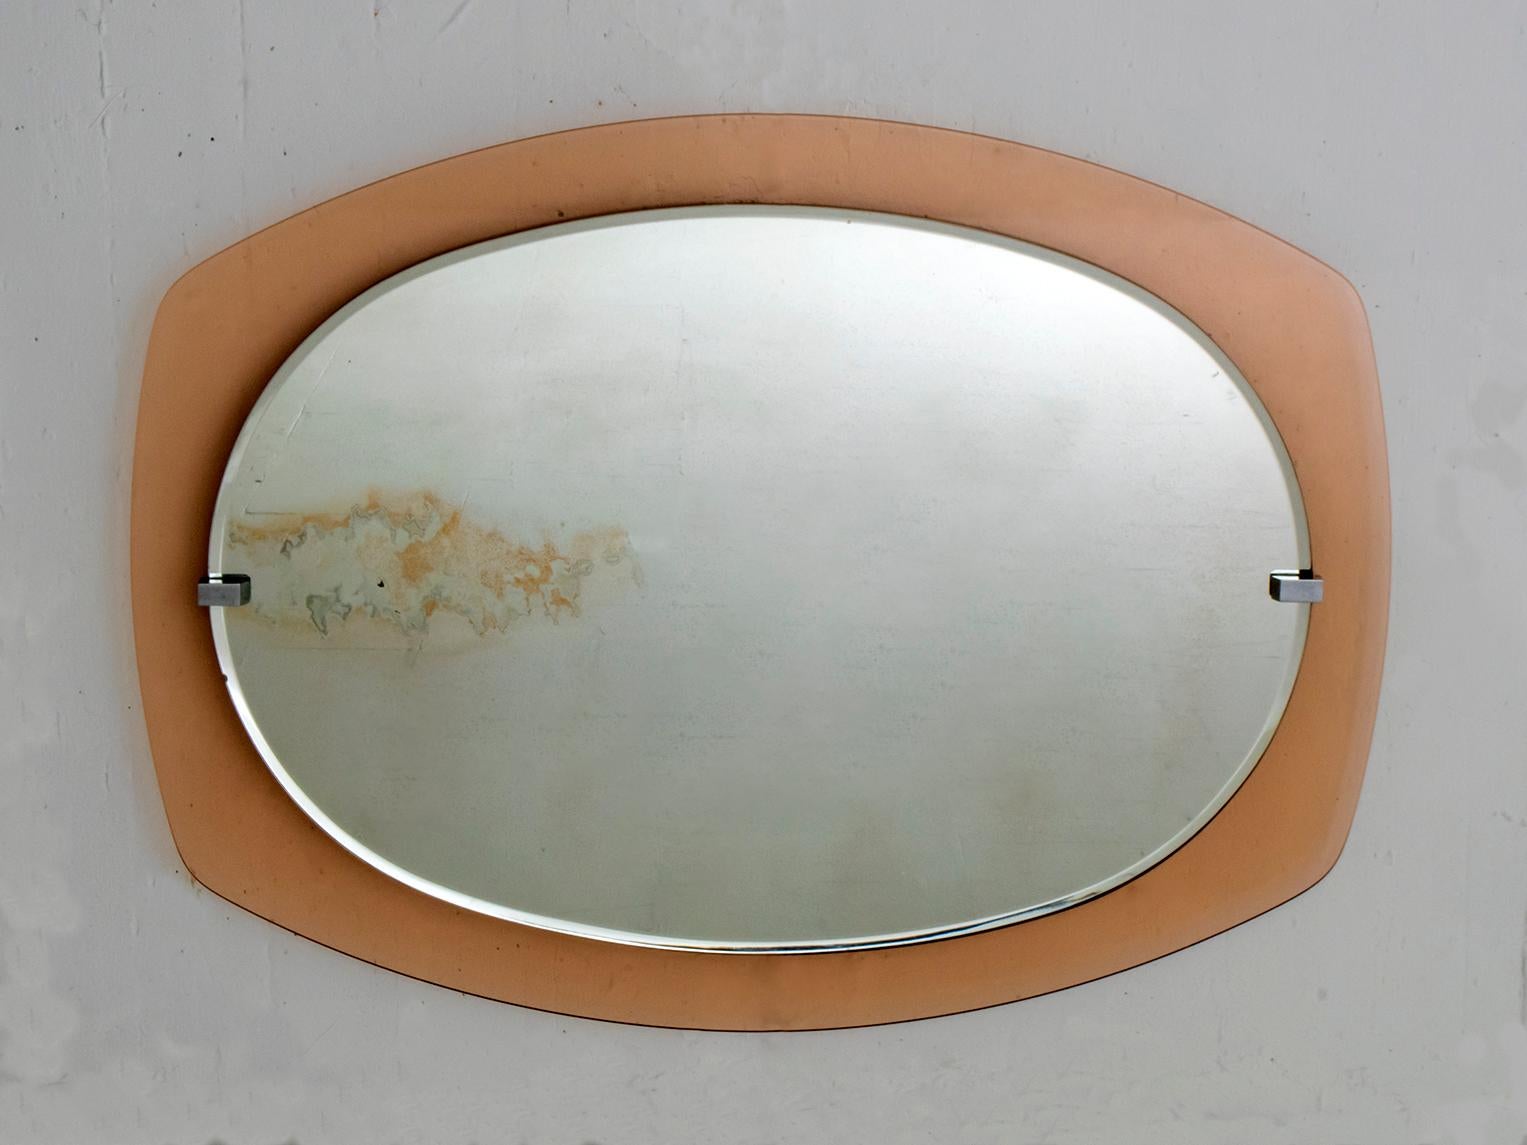 This beveled mirror was produced in the 1960s by the famous Italian company Veca. It features a frame in caramelized glass and screw heads in nickel-plated brass.